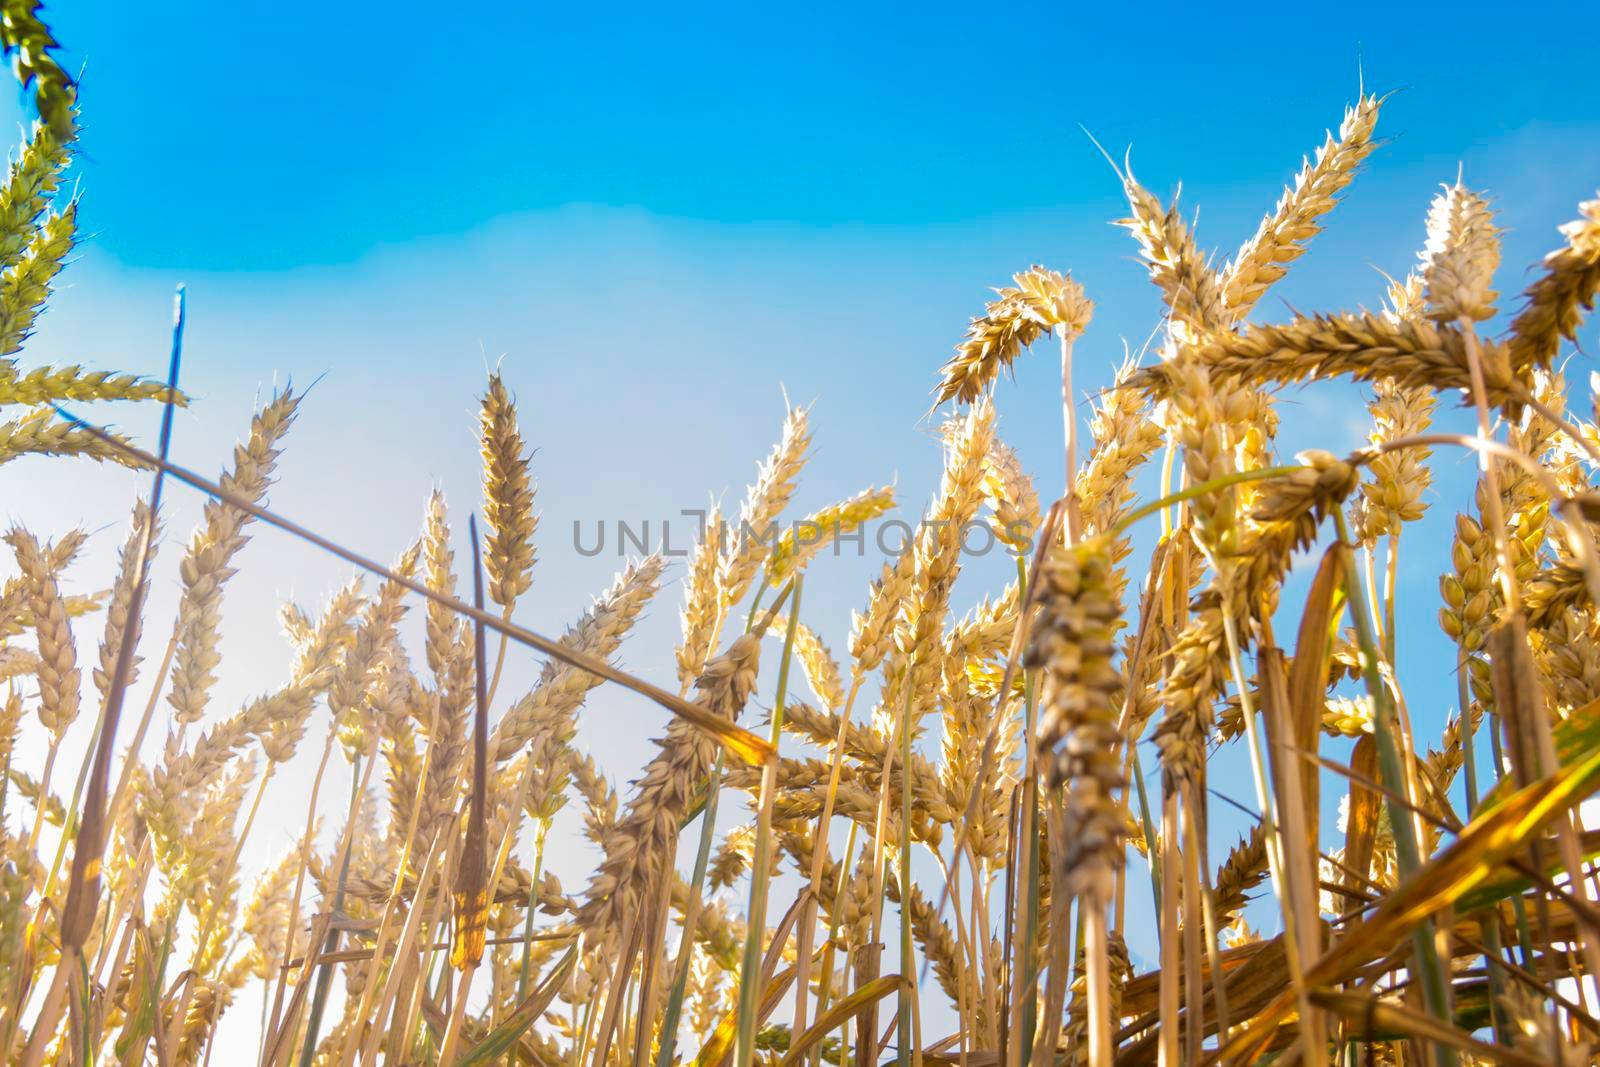 Wheat ears close-up against the background of the setting sun, blue sky and sunlight. It's time to harvest. The food crisis in the world. A field for harvesting bread.